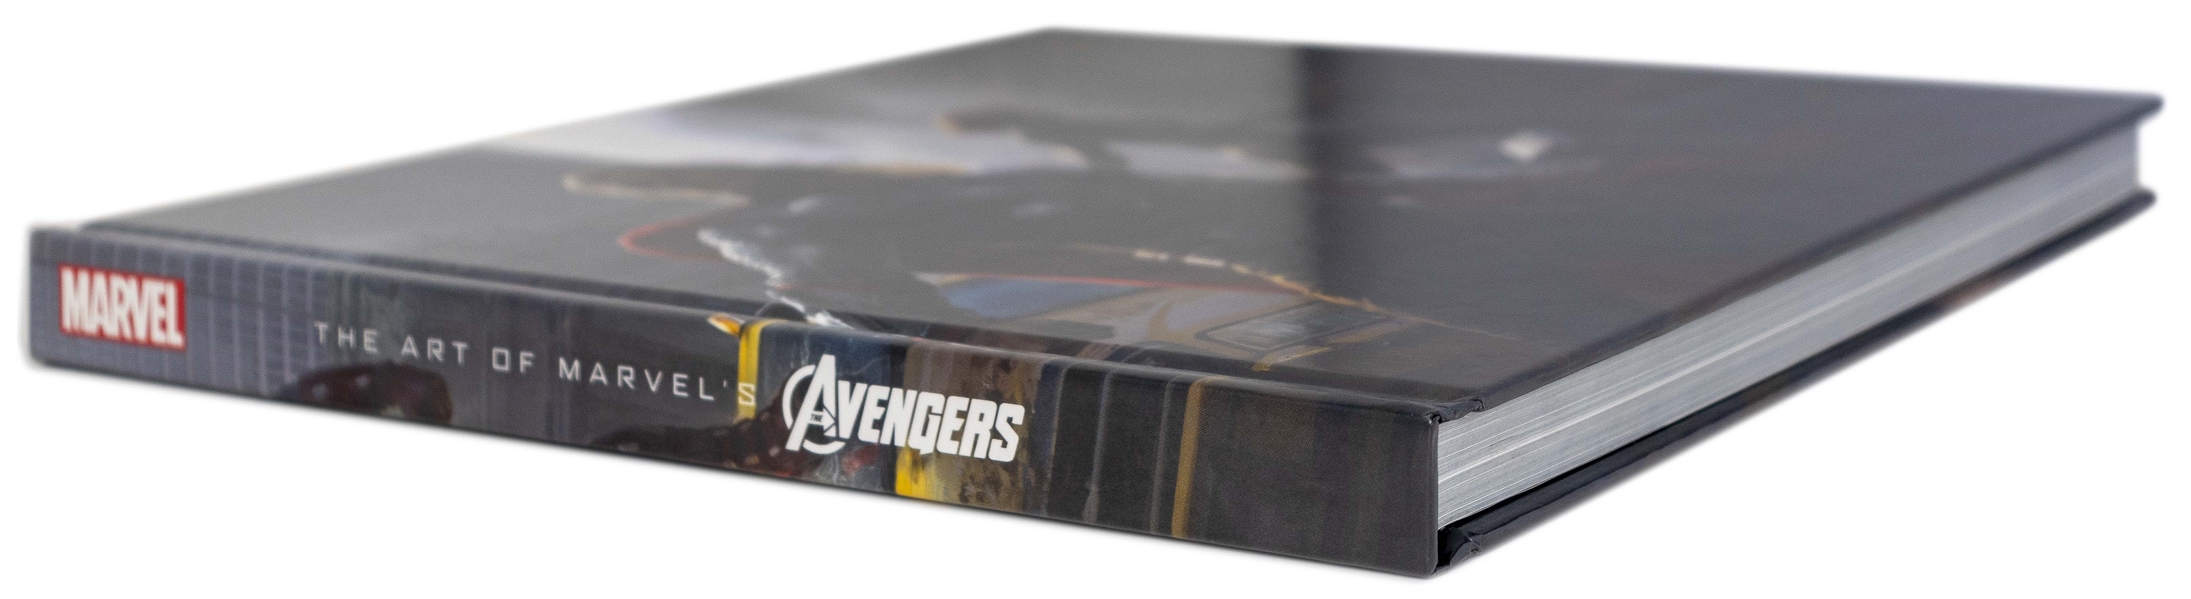 Stan Lee Signed ''The Art of the Avengers'' Coffee Table Book -- Also Signed by 7 Members of Superhero Squad Including Chris Hemsworth & Chris Evans